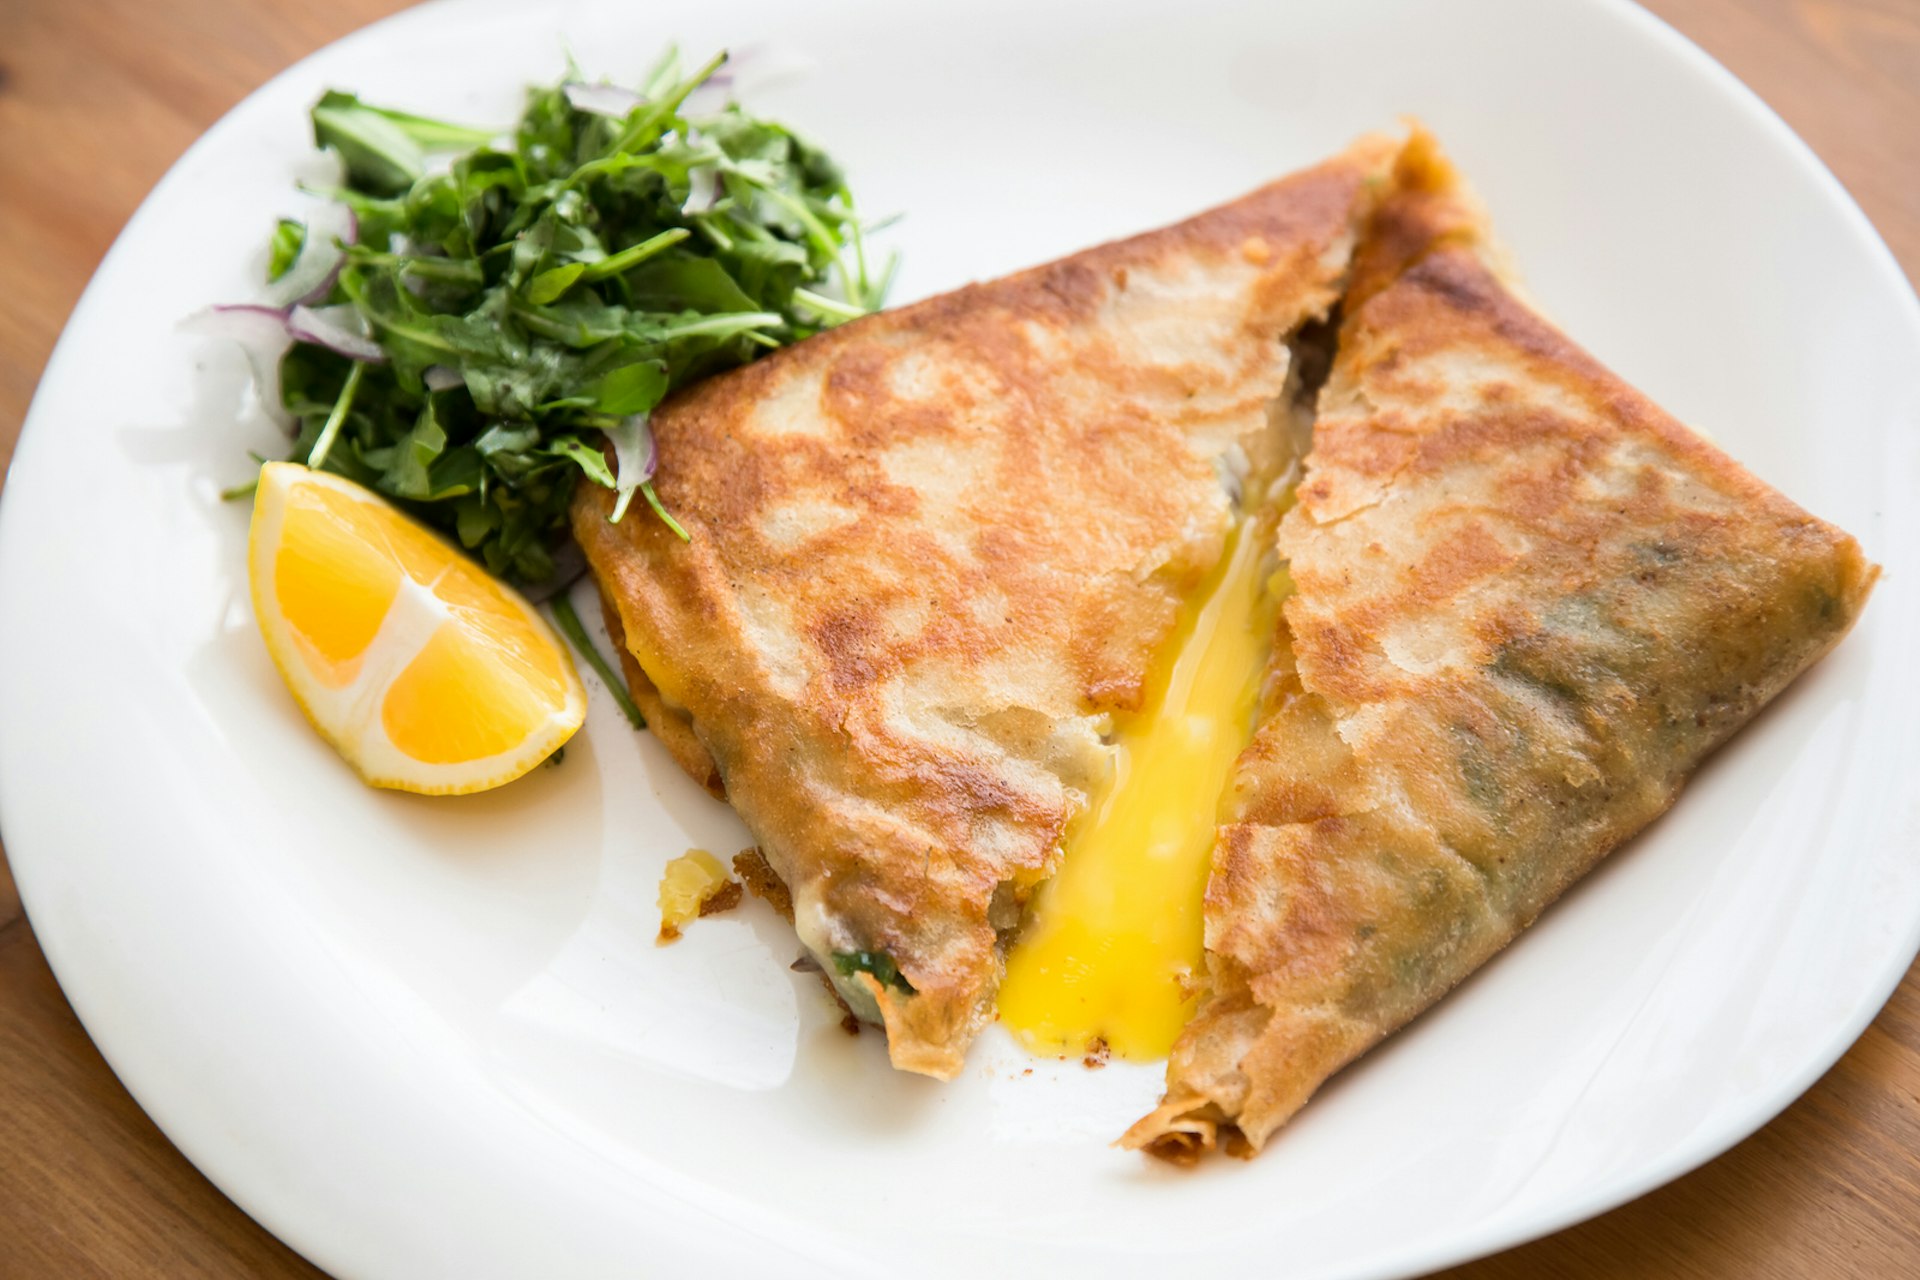 Brik, a classic Tunisian dish made with fried pastry and egg. is on a white plate and garnished with a lemon wedge and a pile of green parsley